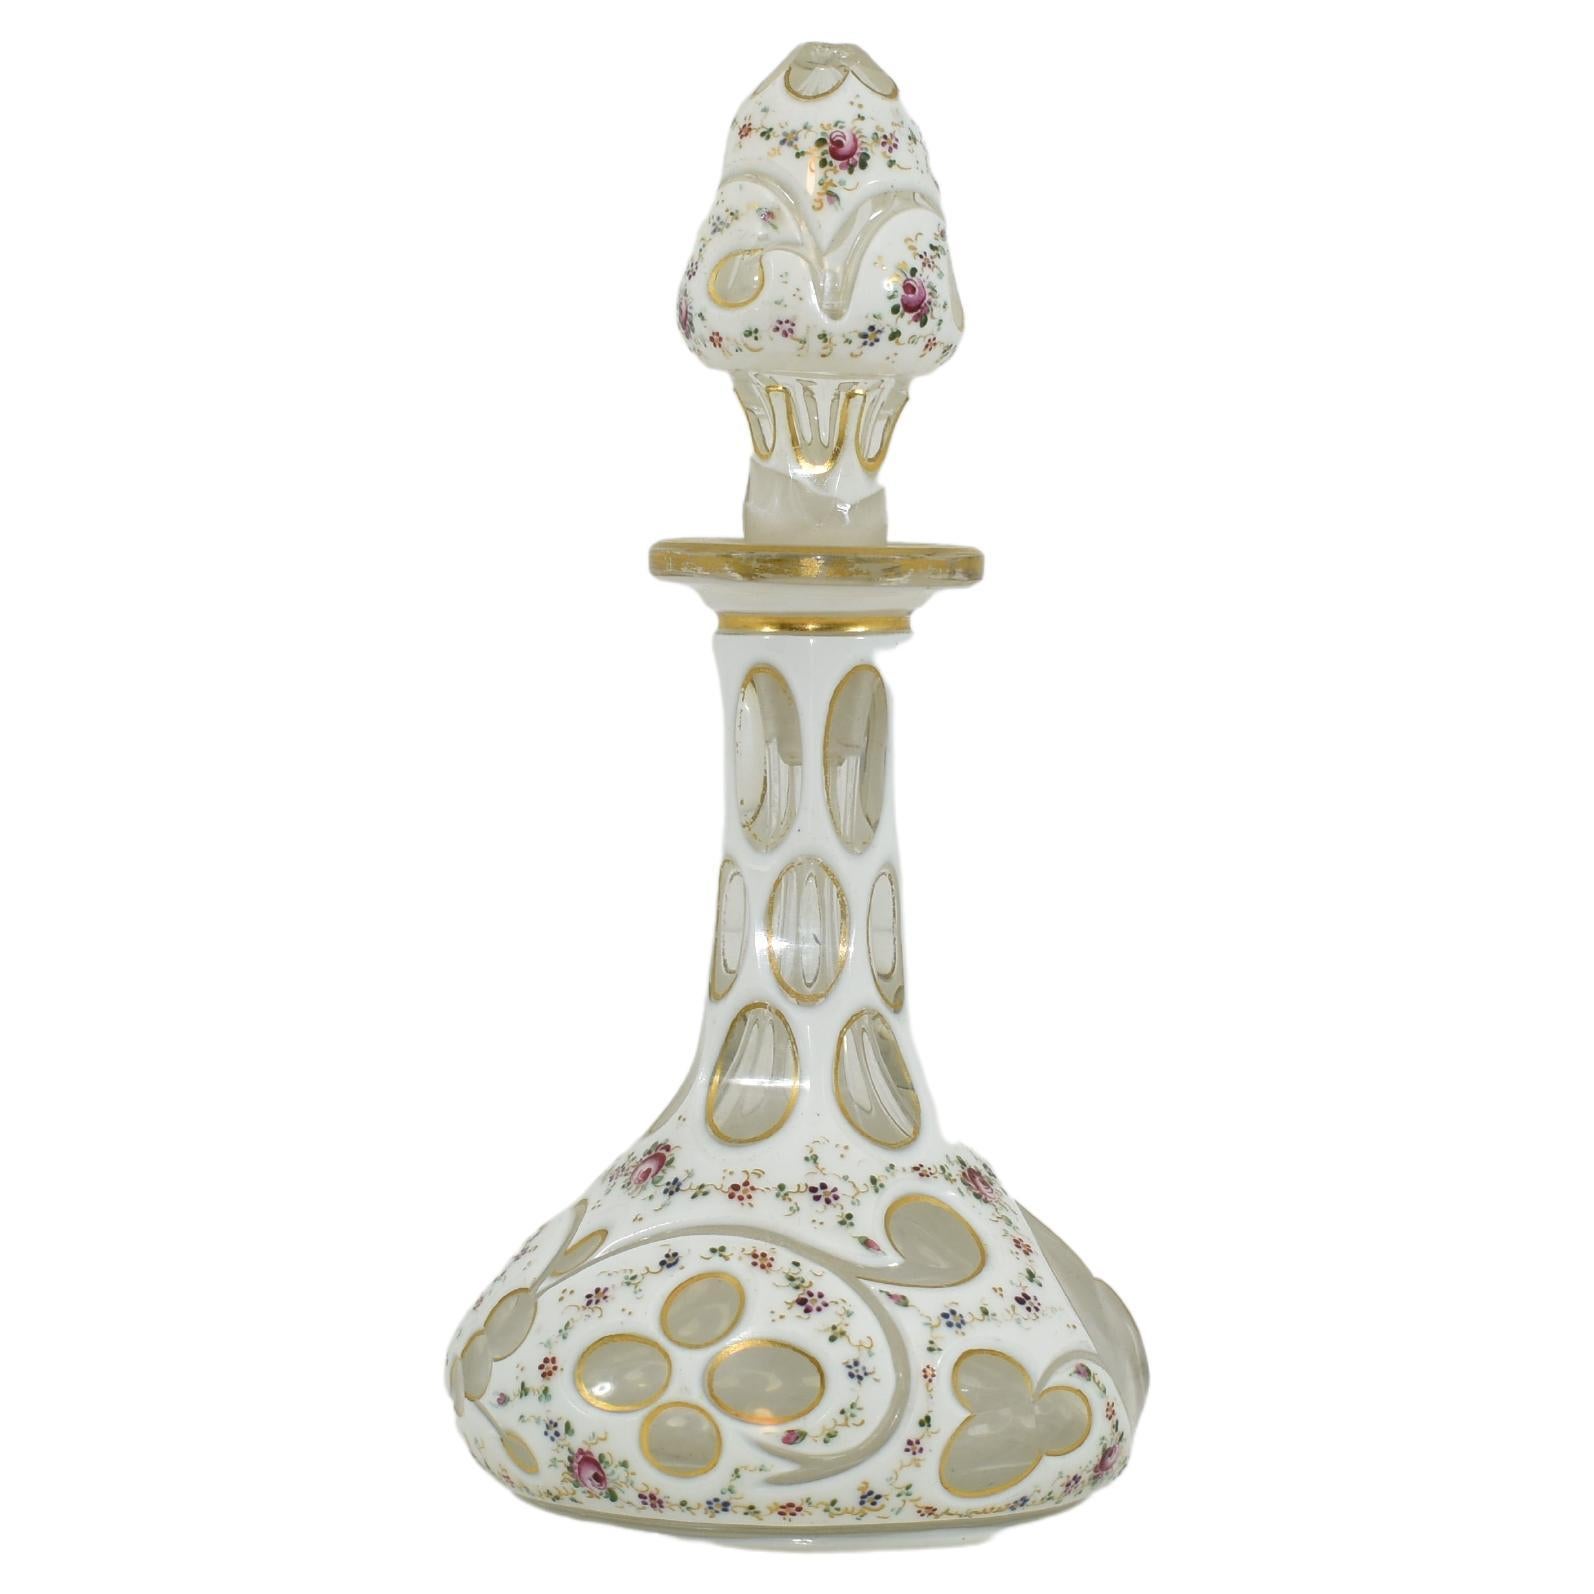 Antique perfume bottle with stopper
transparent glass with milky white cut opaline glass overlay
decorated all arround with clourful enamel
Bohemia, 19th century.